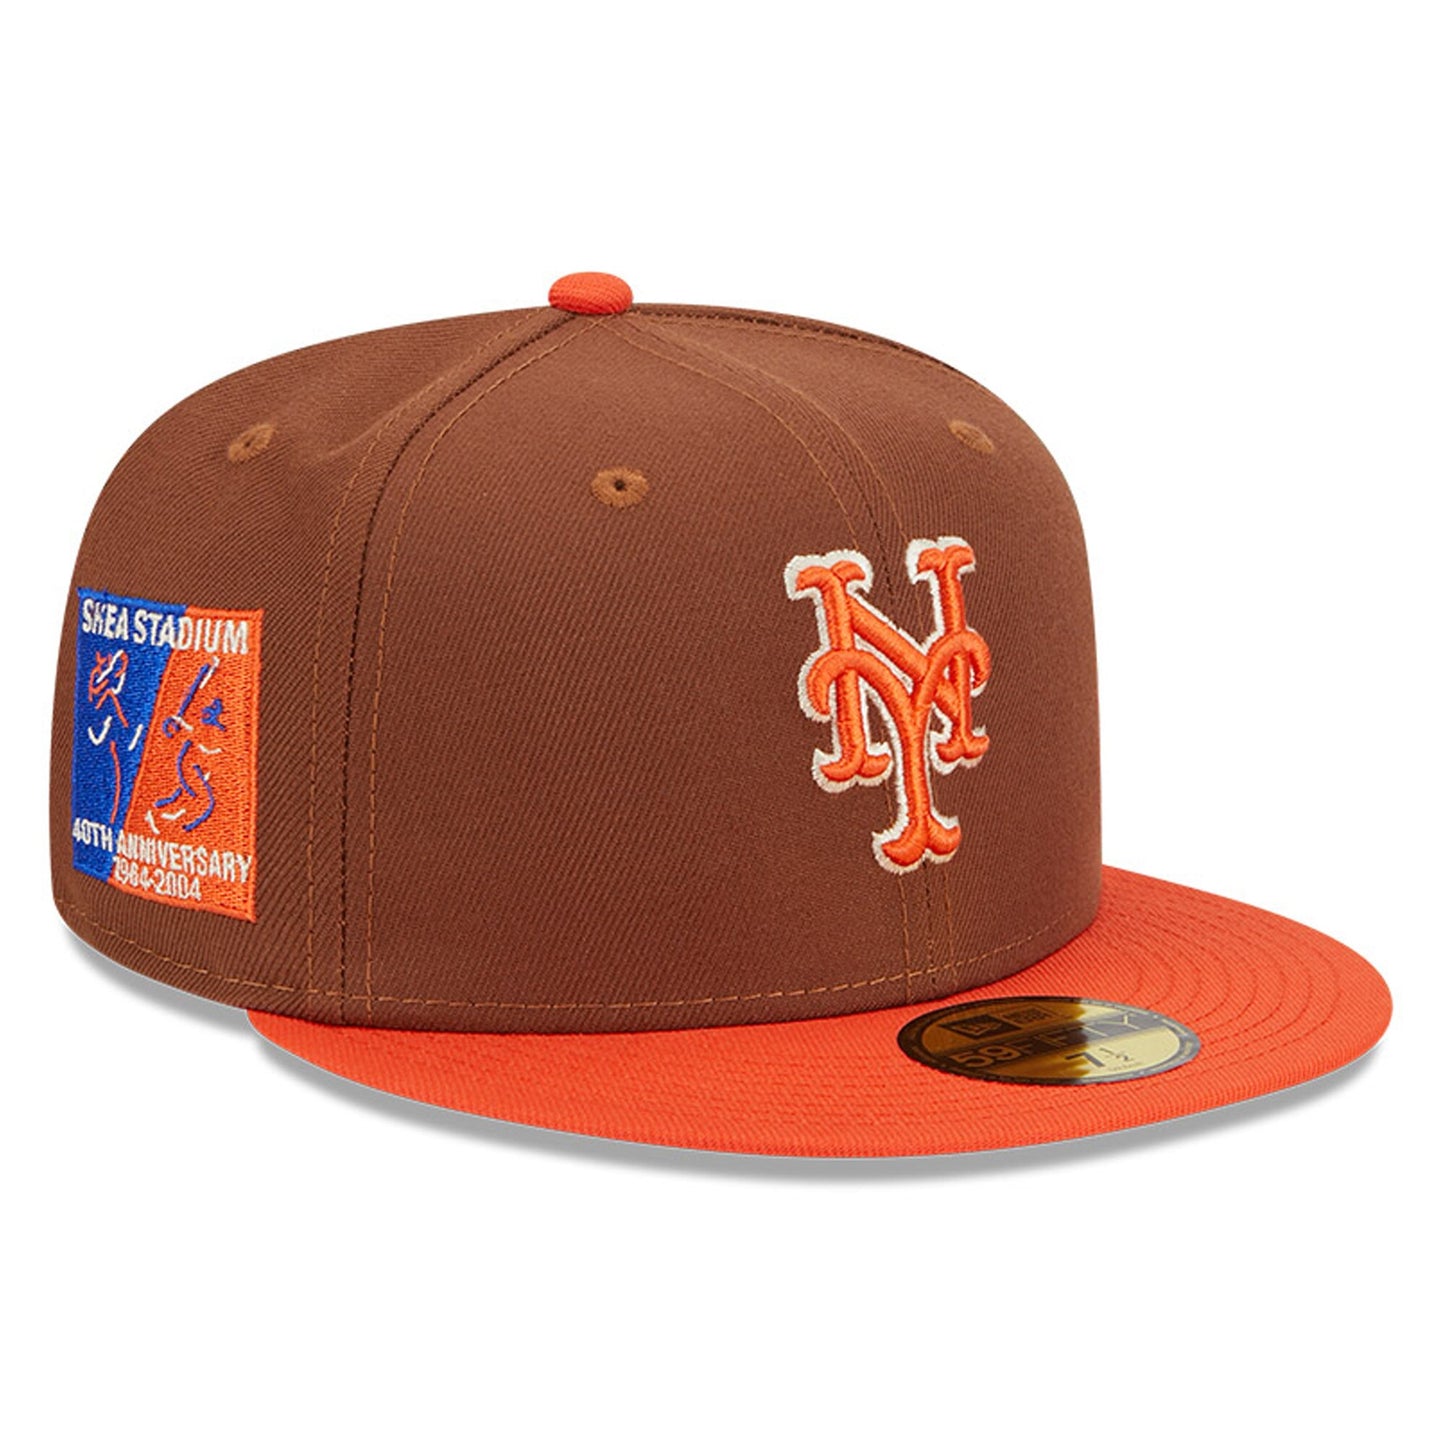 New York Mets New Era Harvest Shea Stadium 40th Anniversary 59FIFTY Fitted Hat - Brown